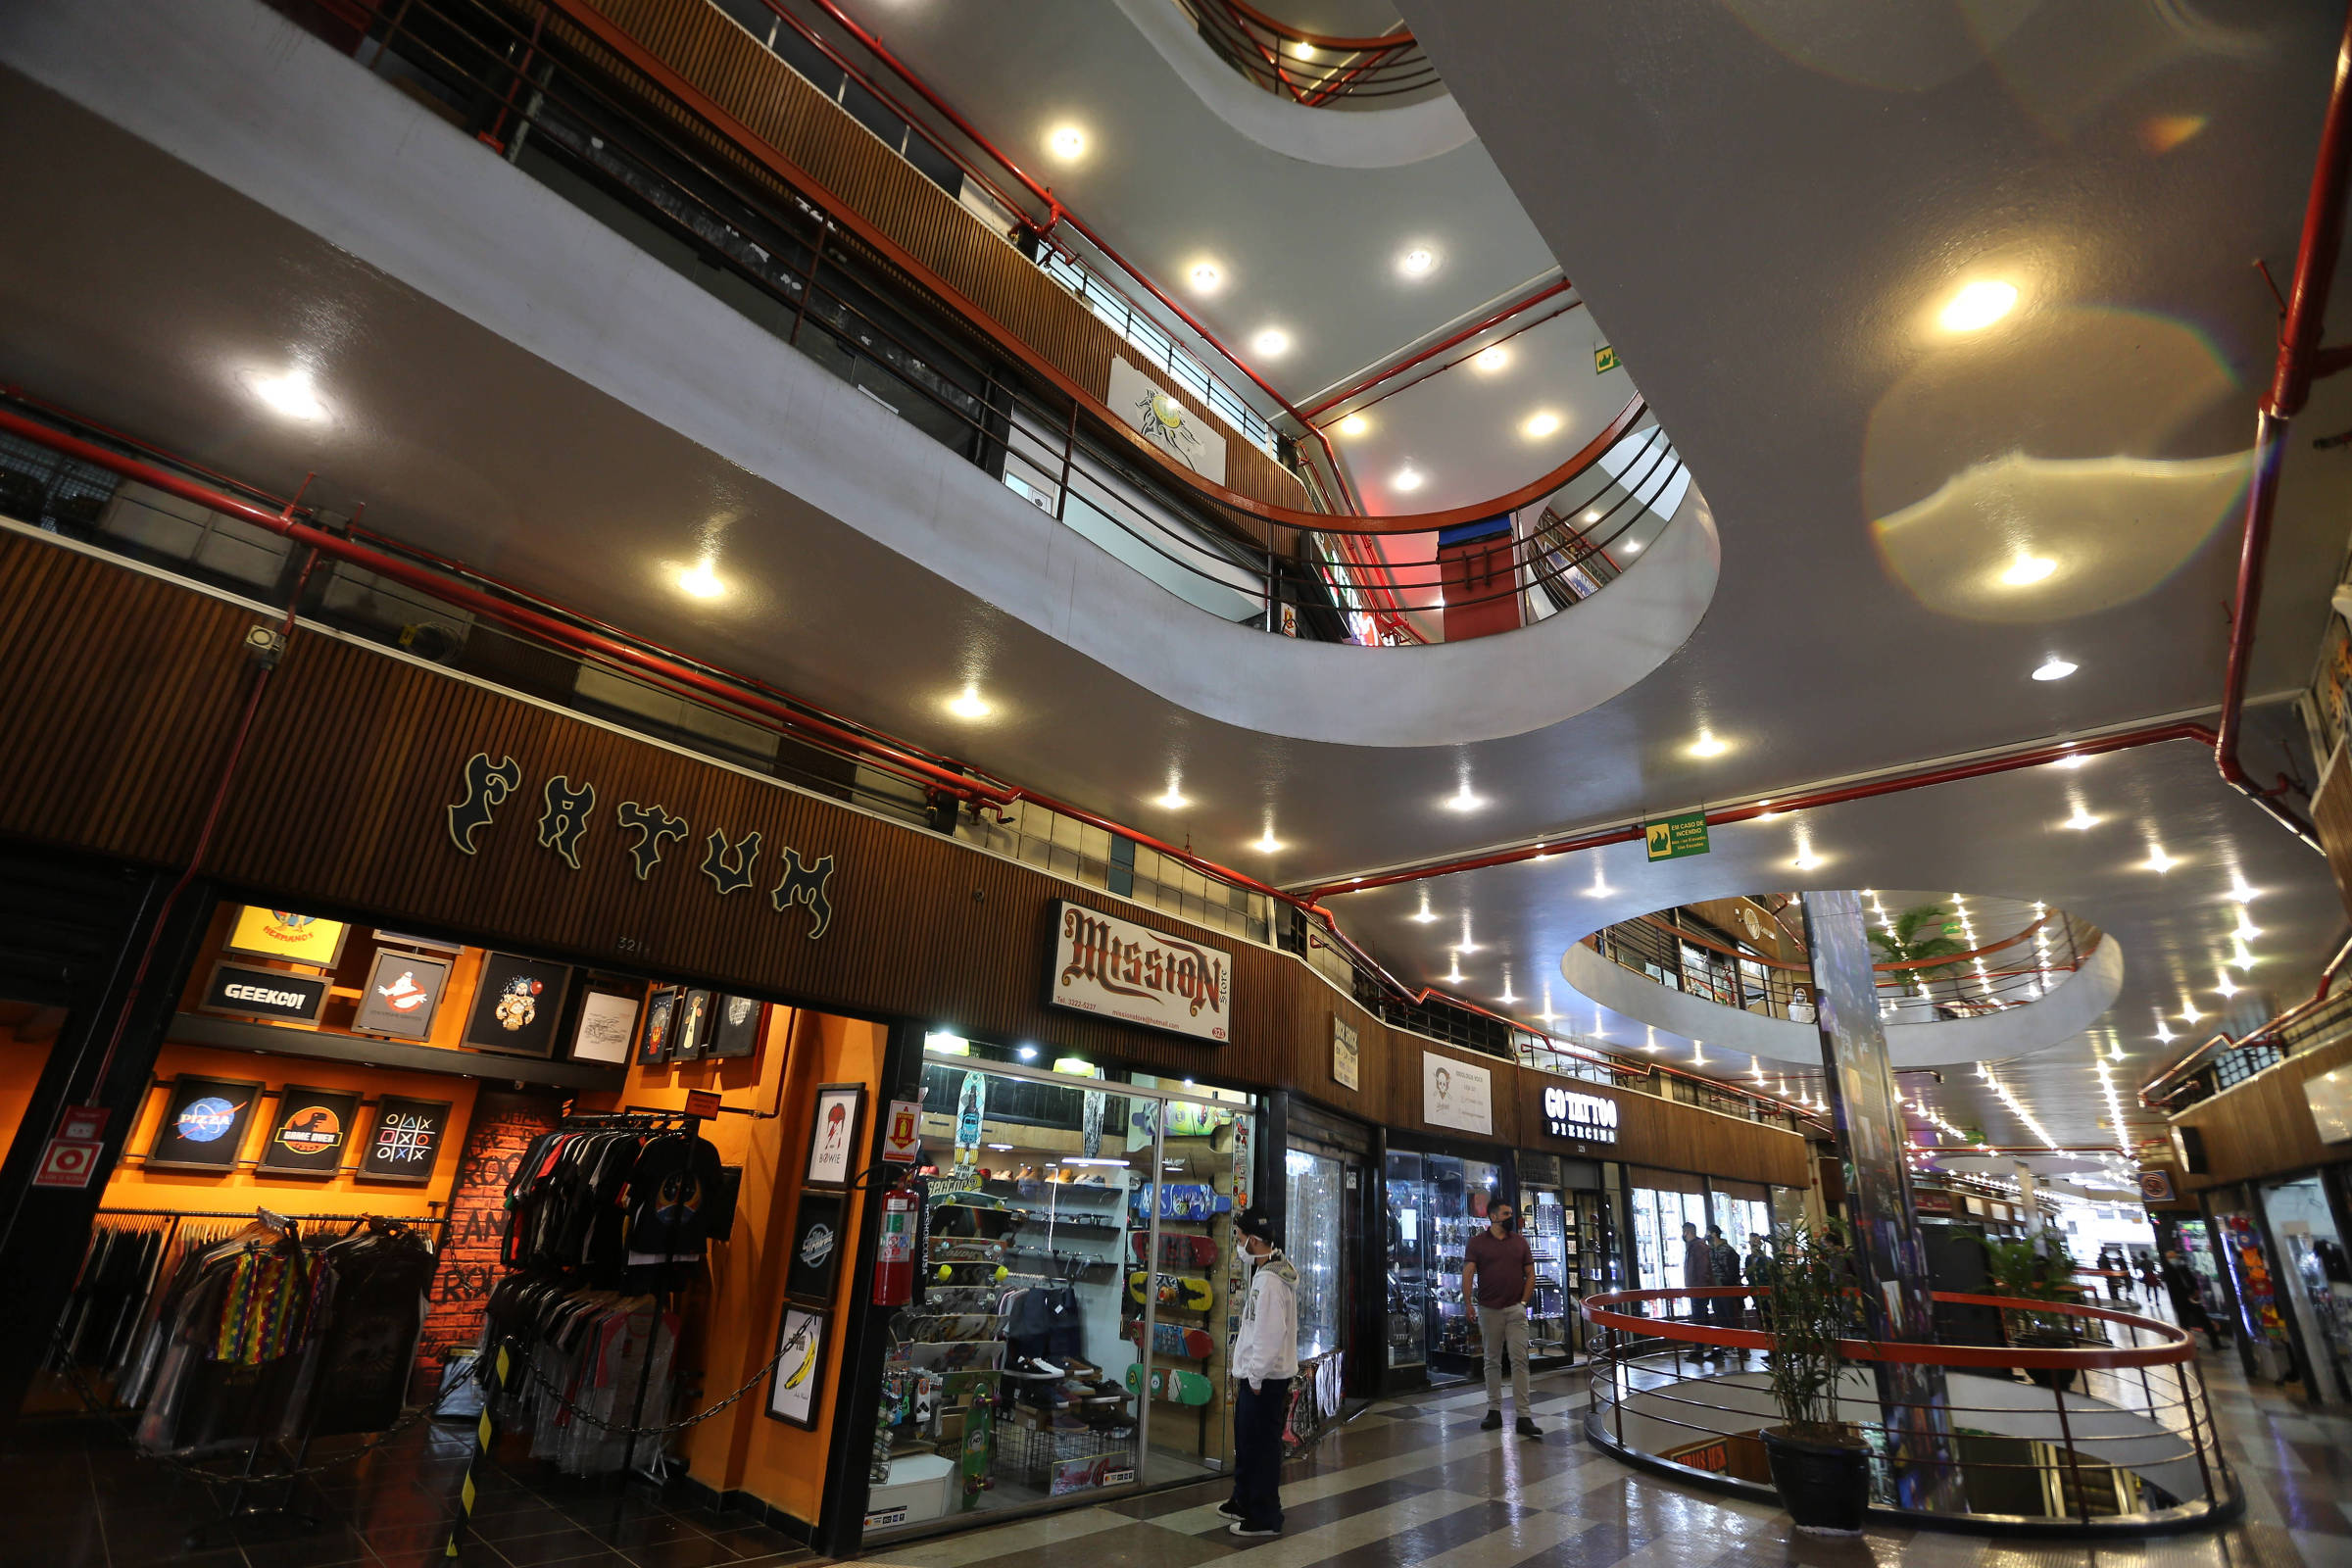 Galeria Do Rock Rock Gallery Shopping Mall in Dowtown Sao